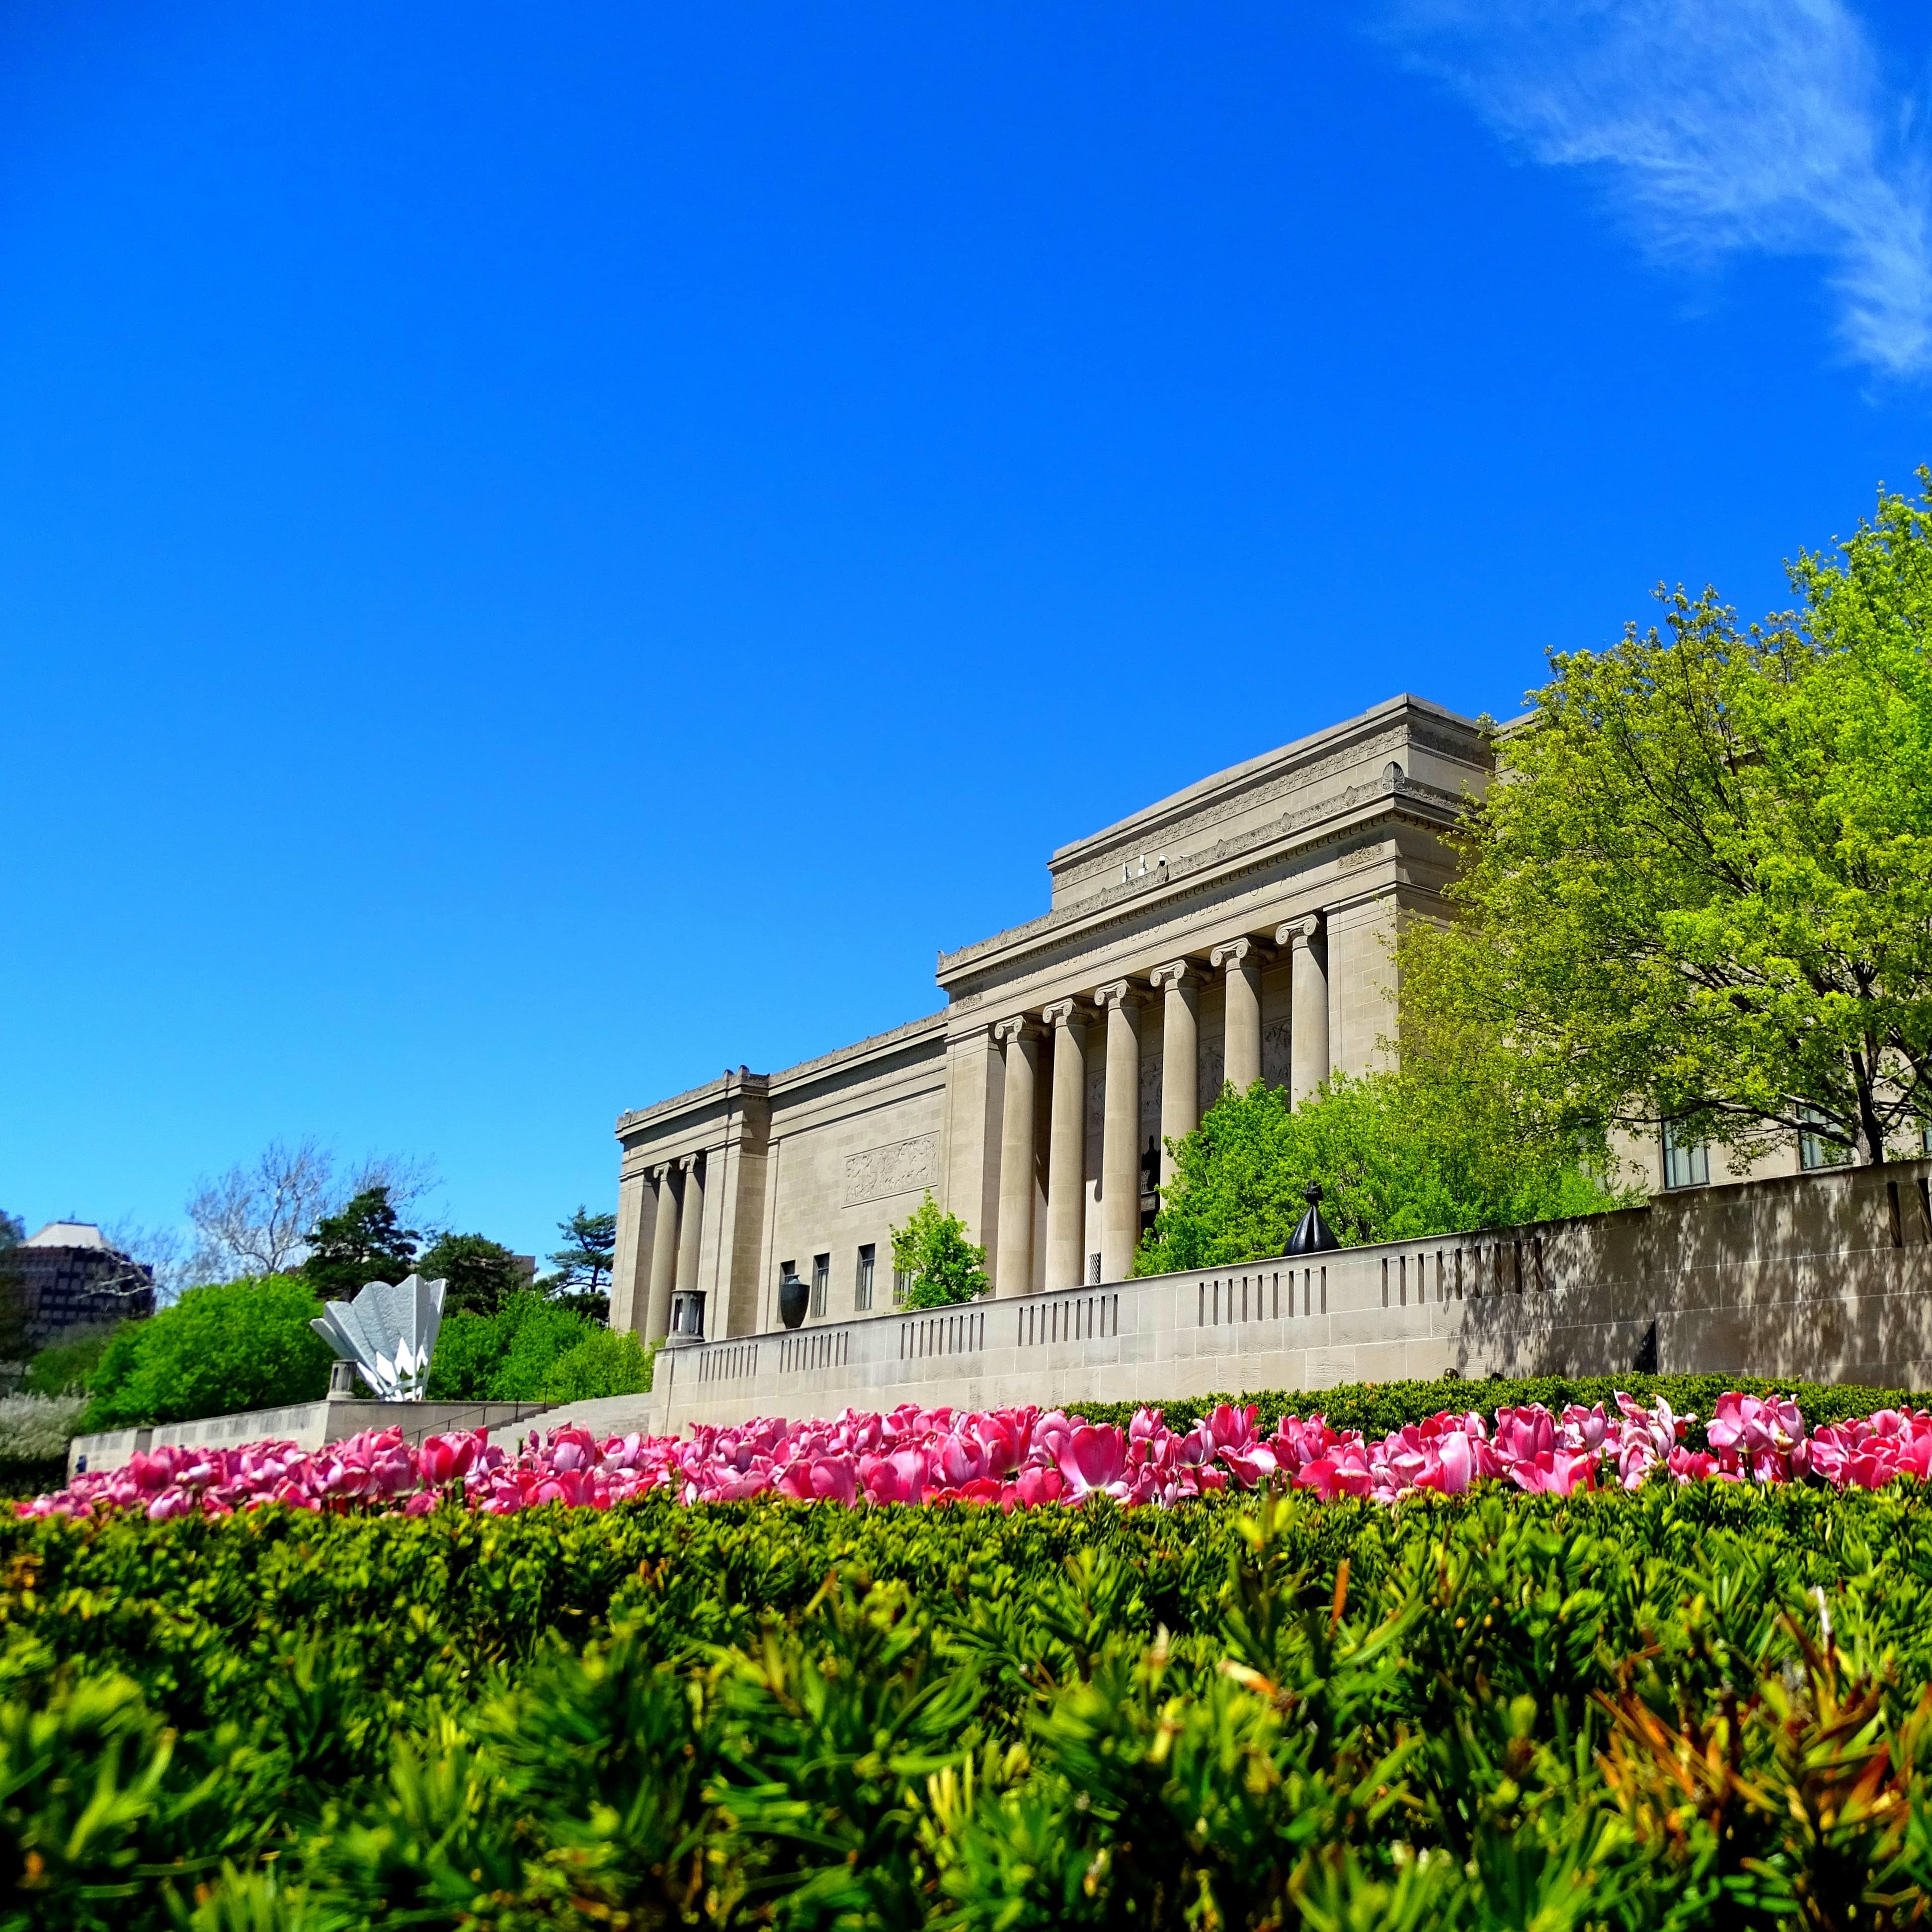 The Nelson-Atkins Museum of Art with greenery and pink flowers in foreground